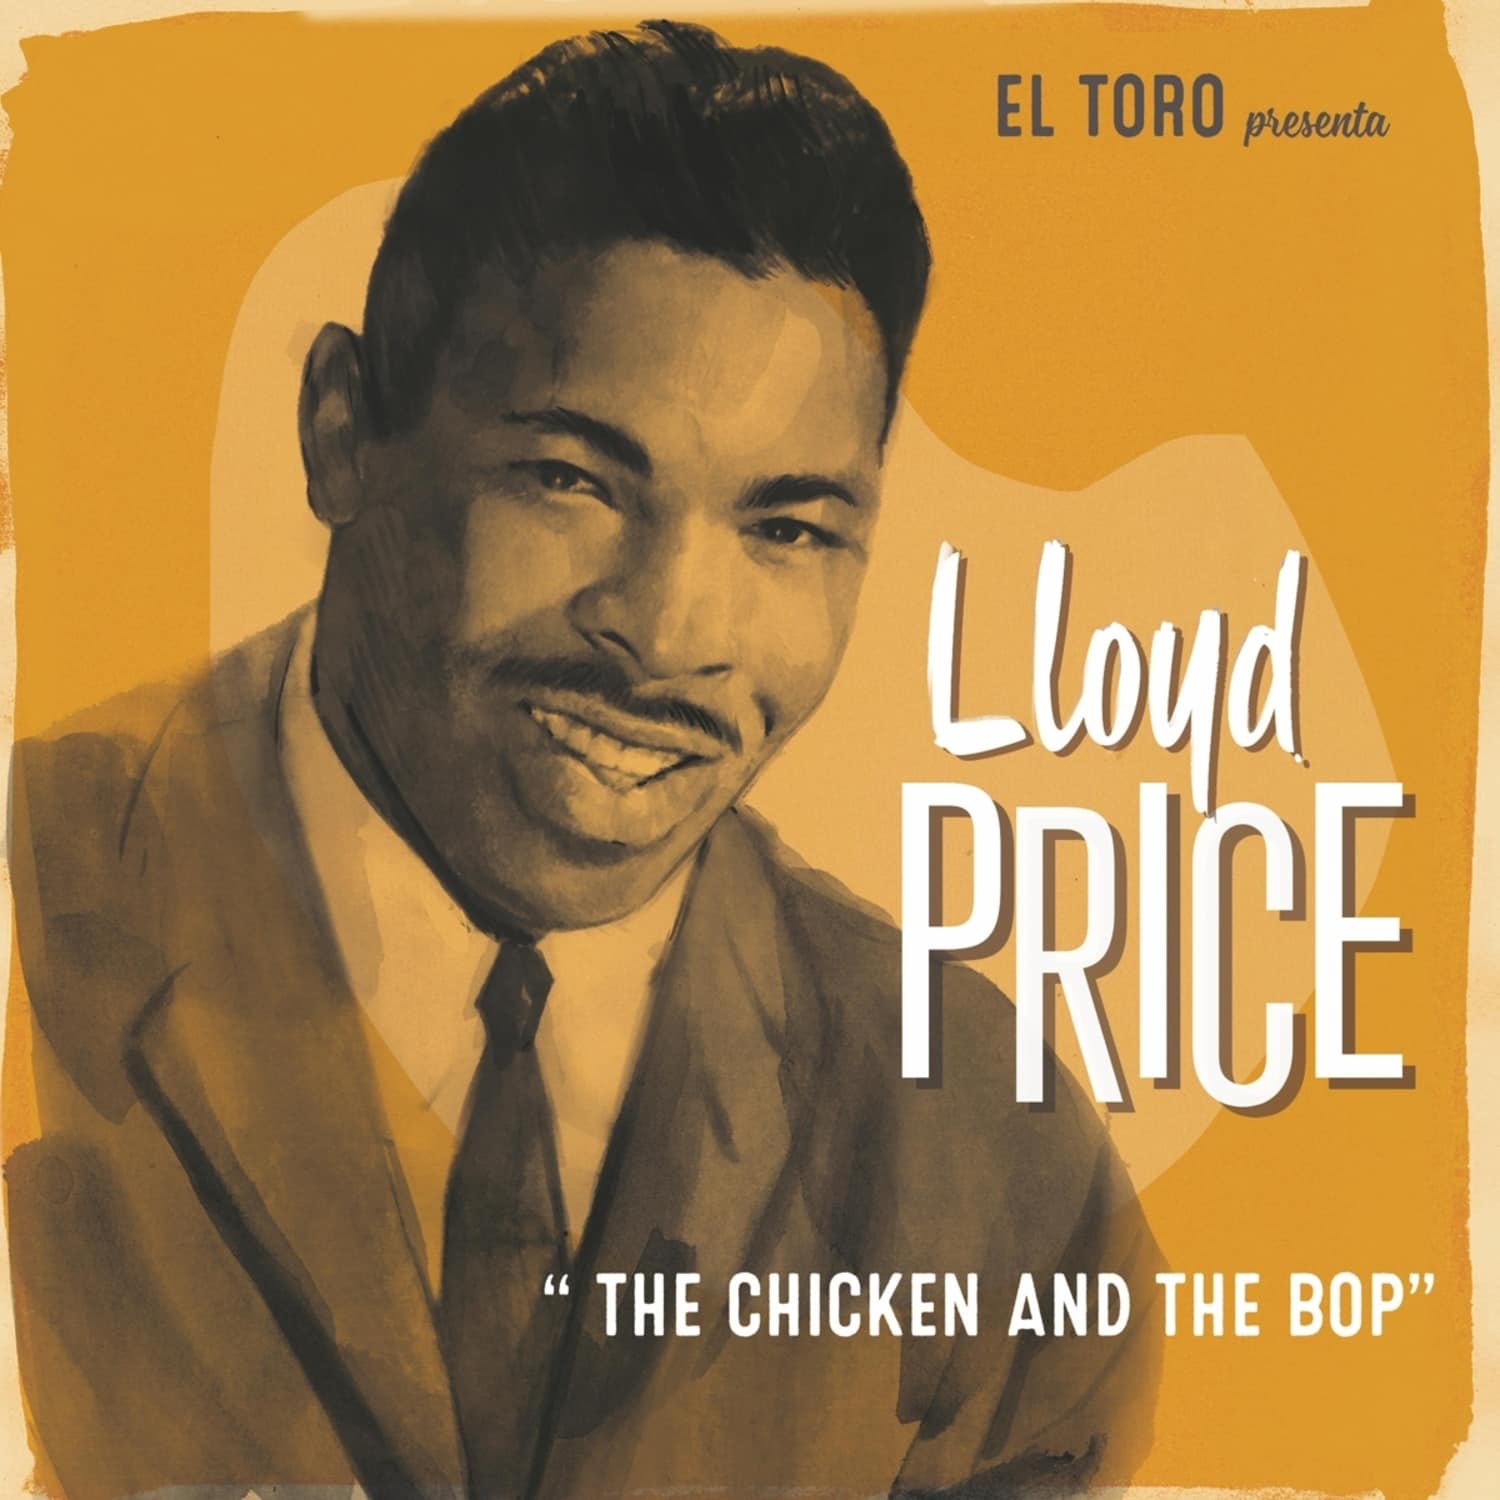  Lloyd Price - THE CHICKEN AND THE BOP EP 